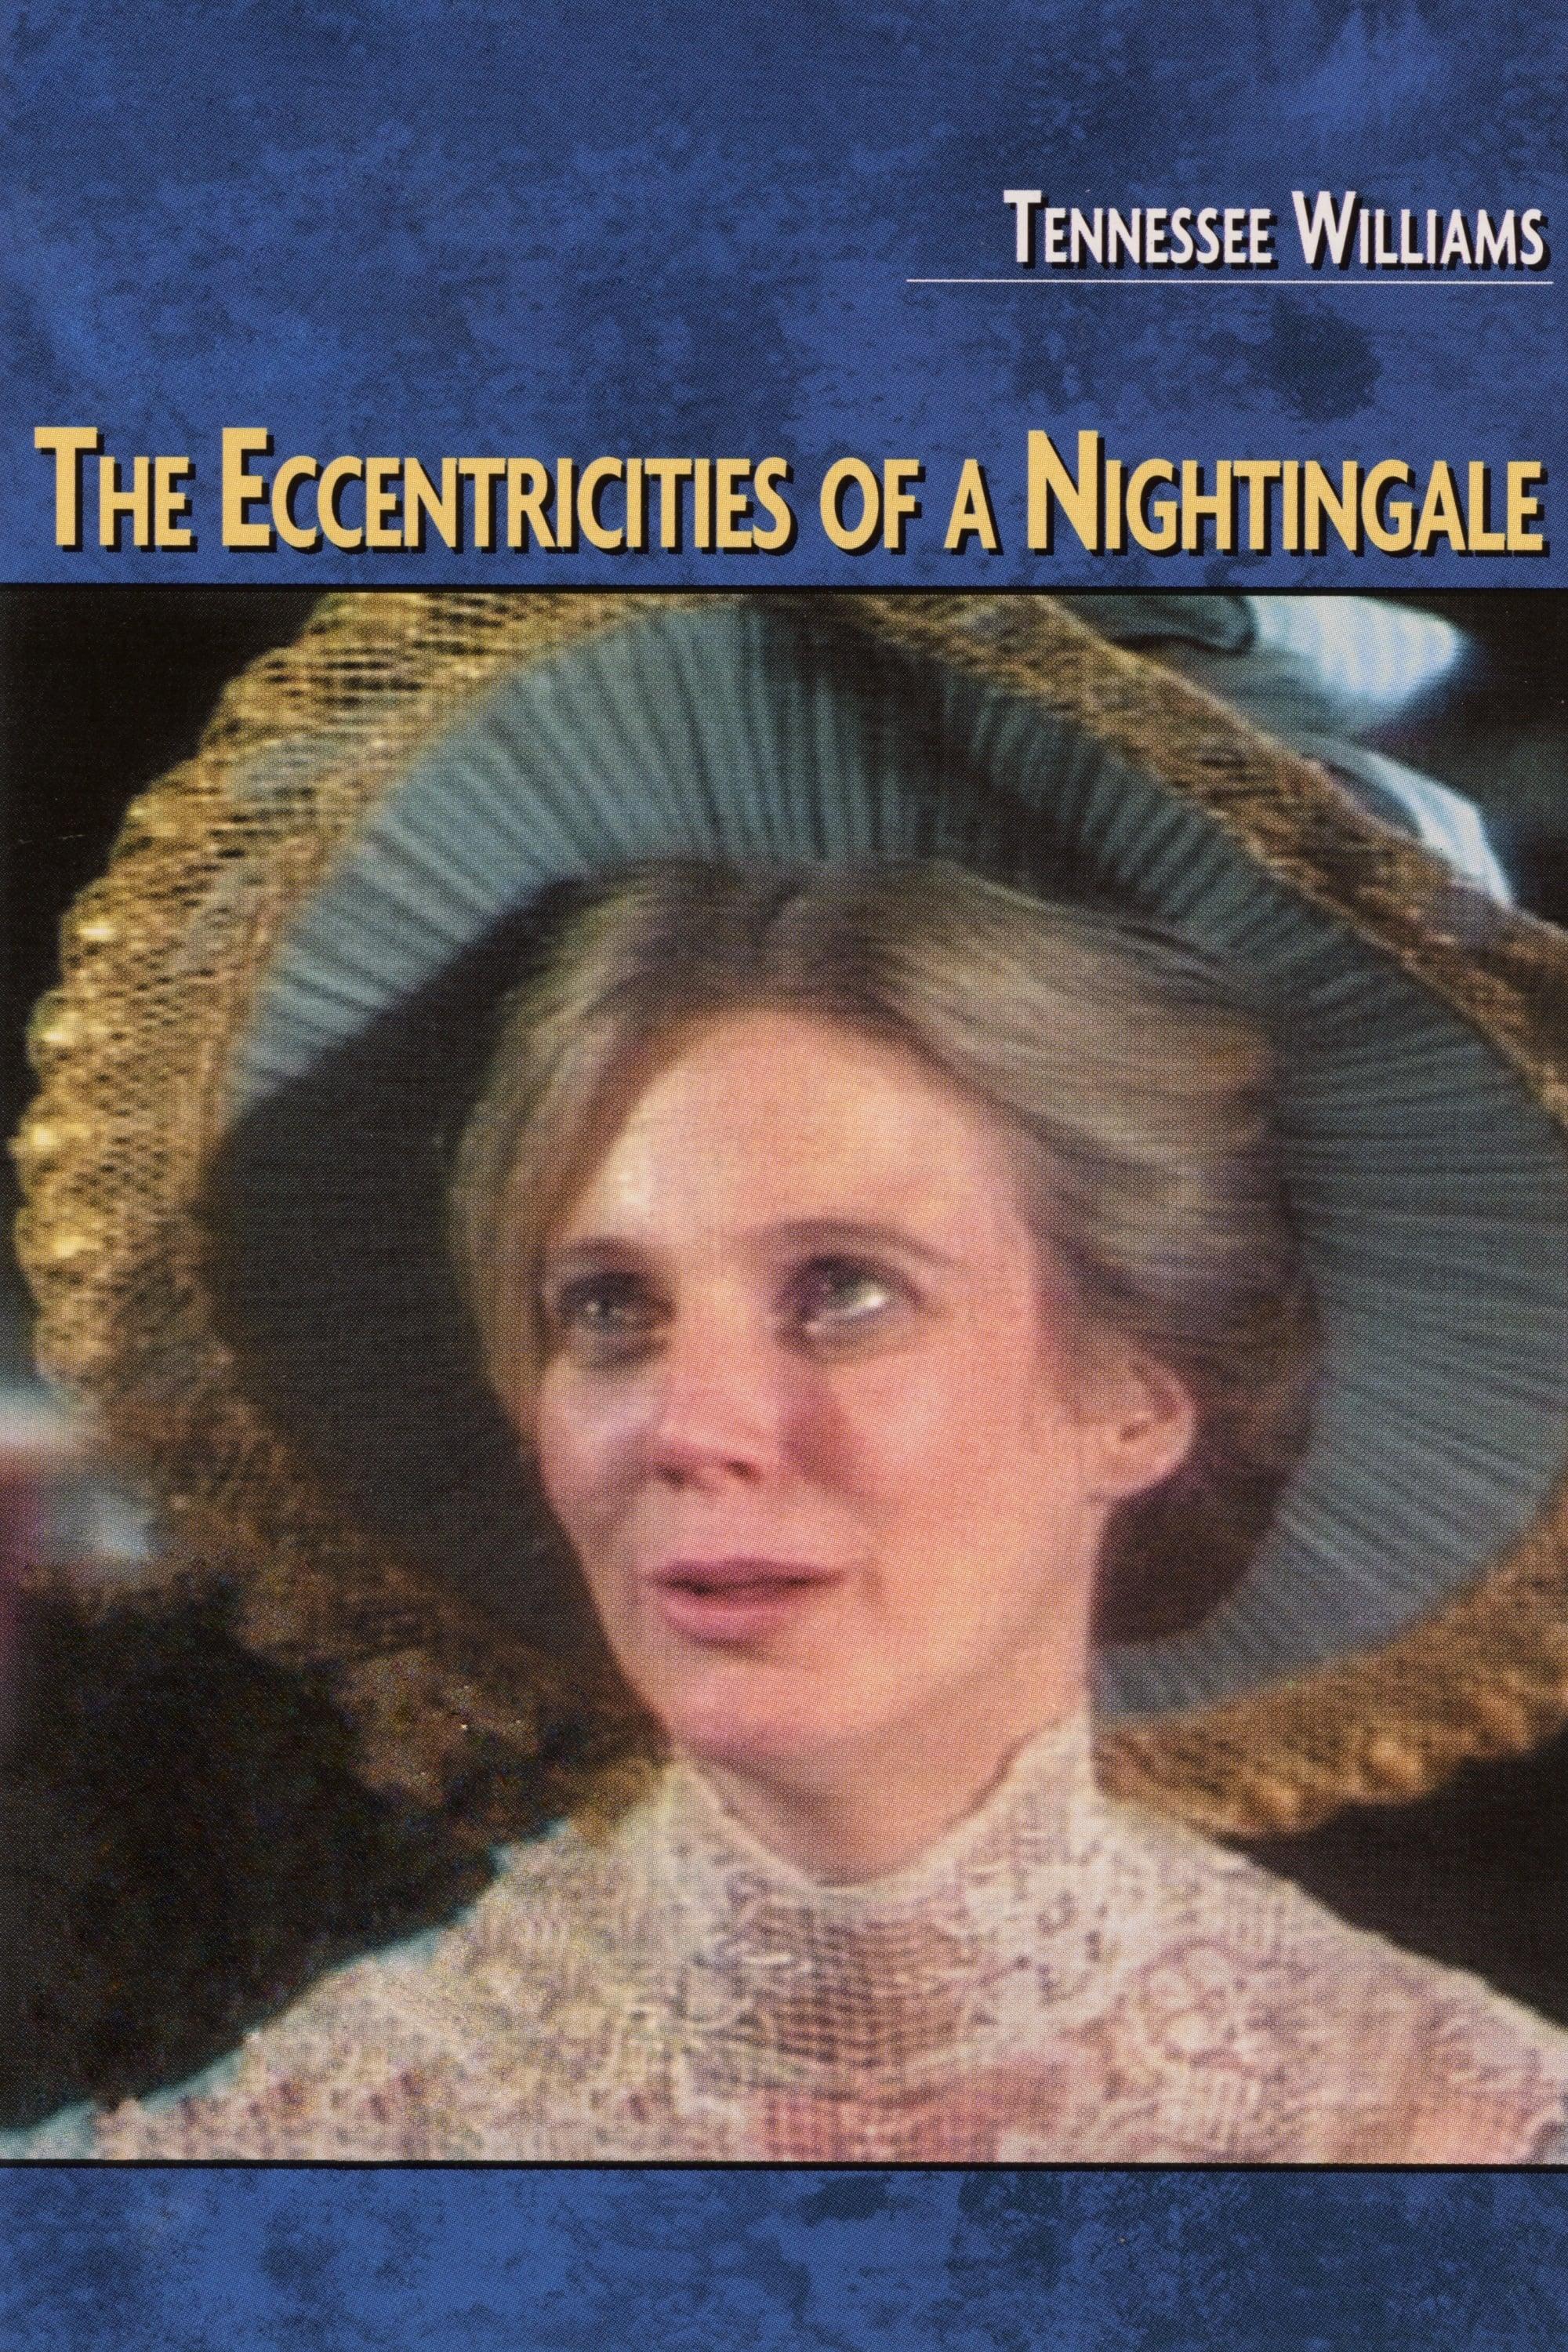 The Eccentricities of a Nightingale poster